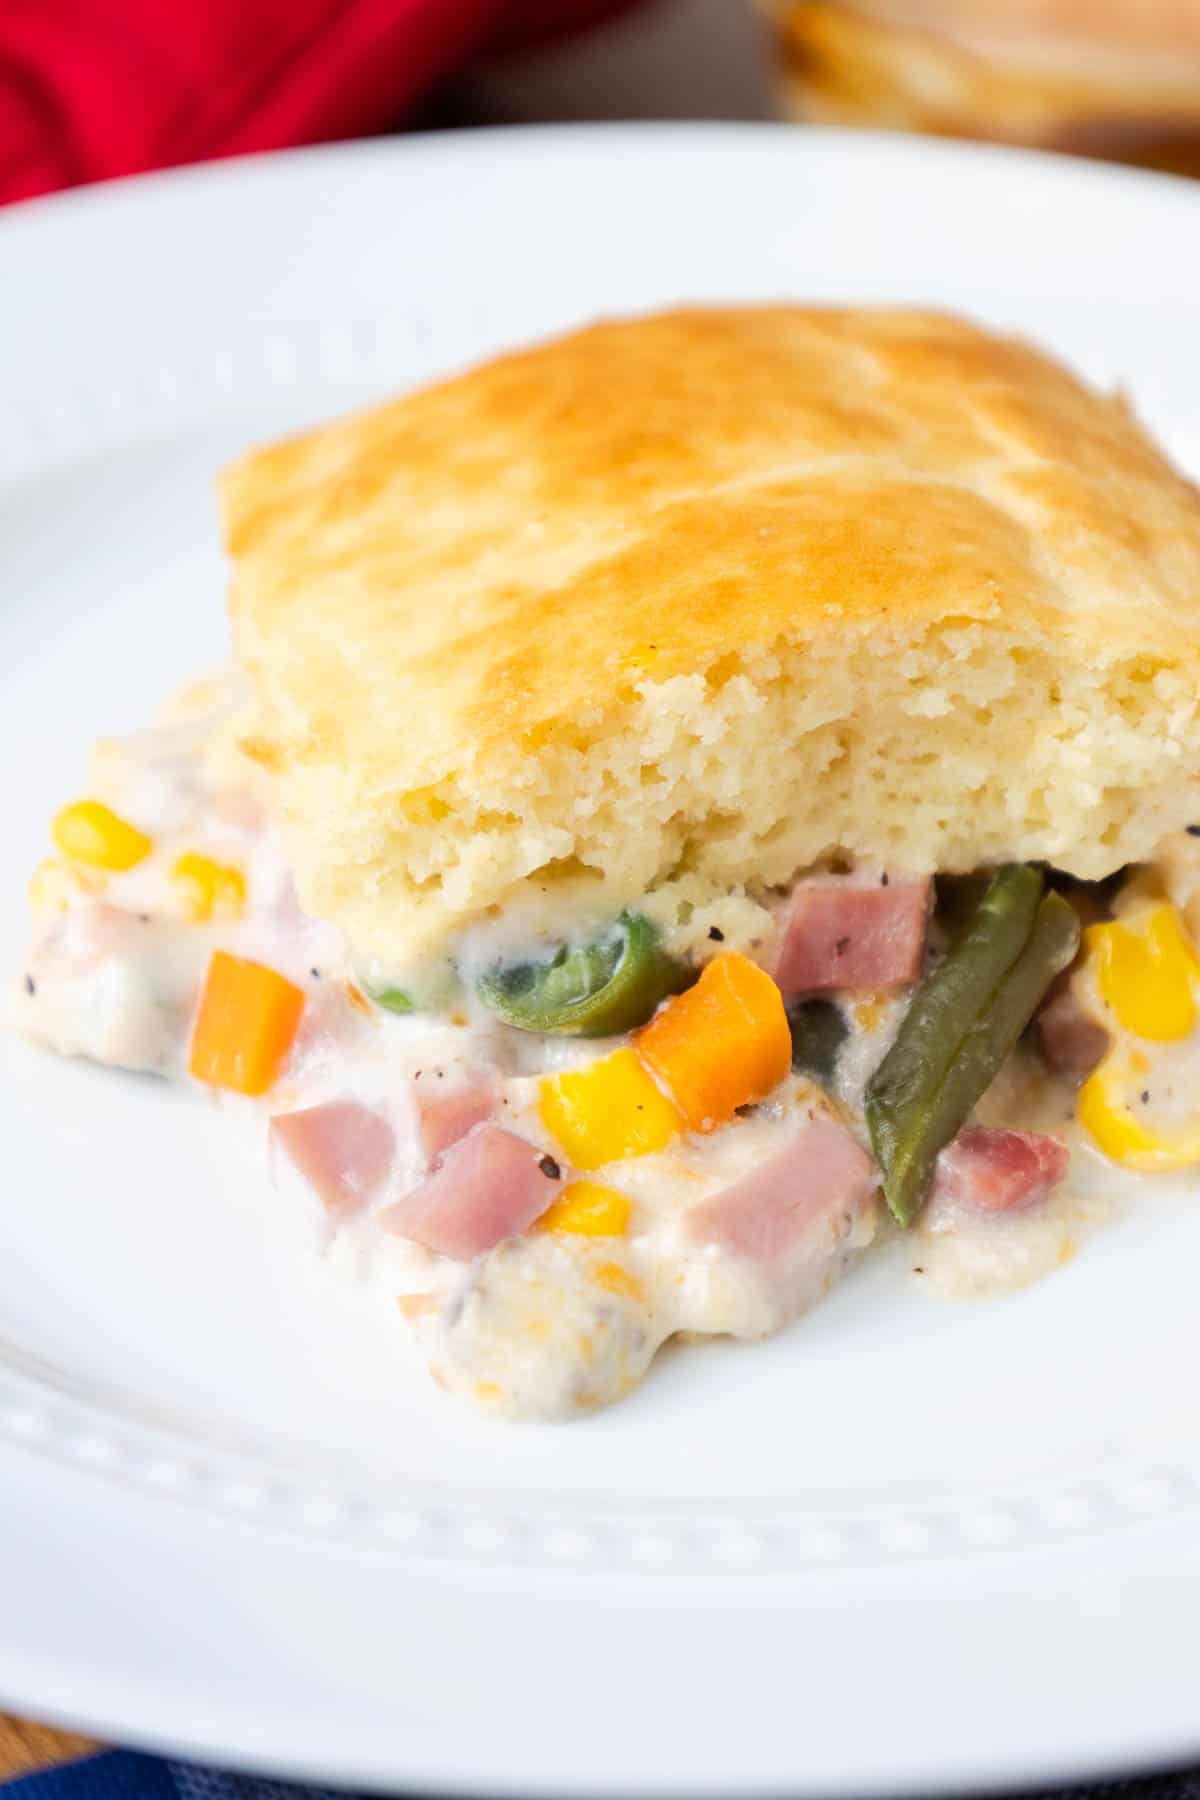 Ham and Vegetable Casserole with a Bisquick Layer on Top